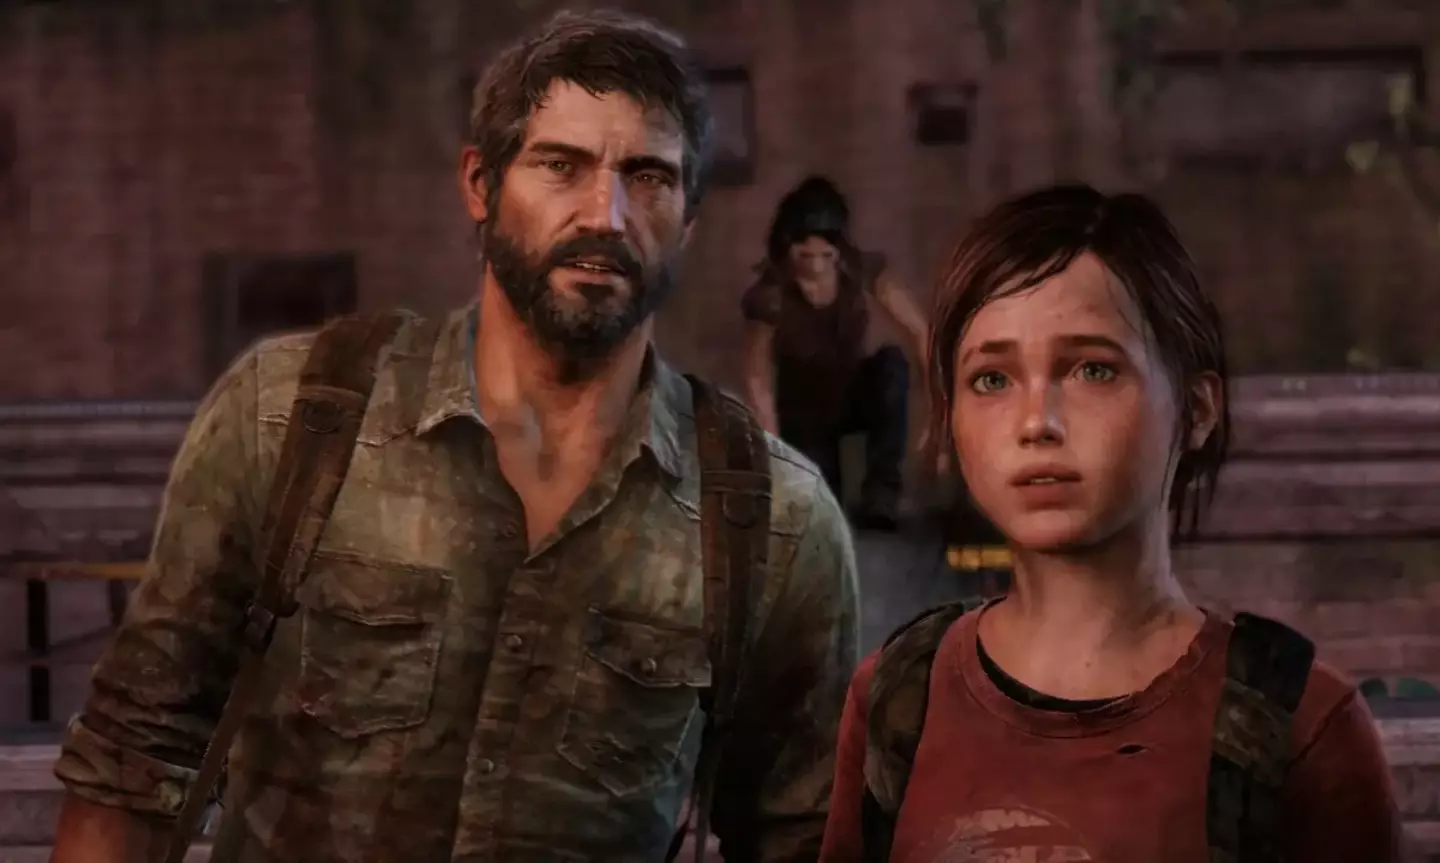 Joel and Ellie in the game.